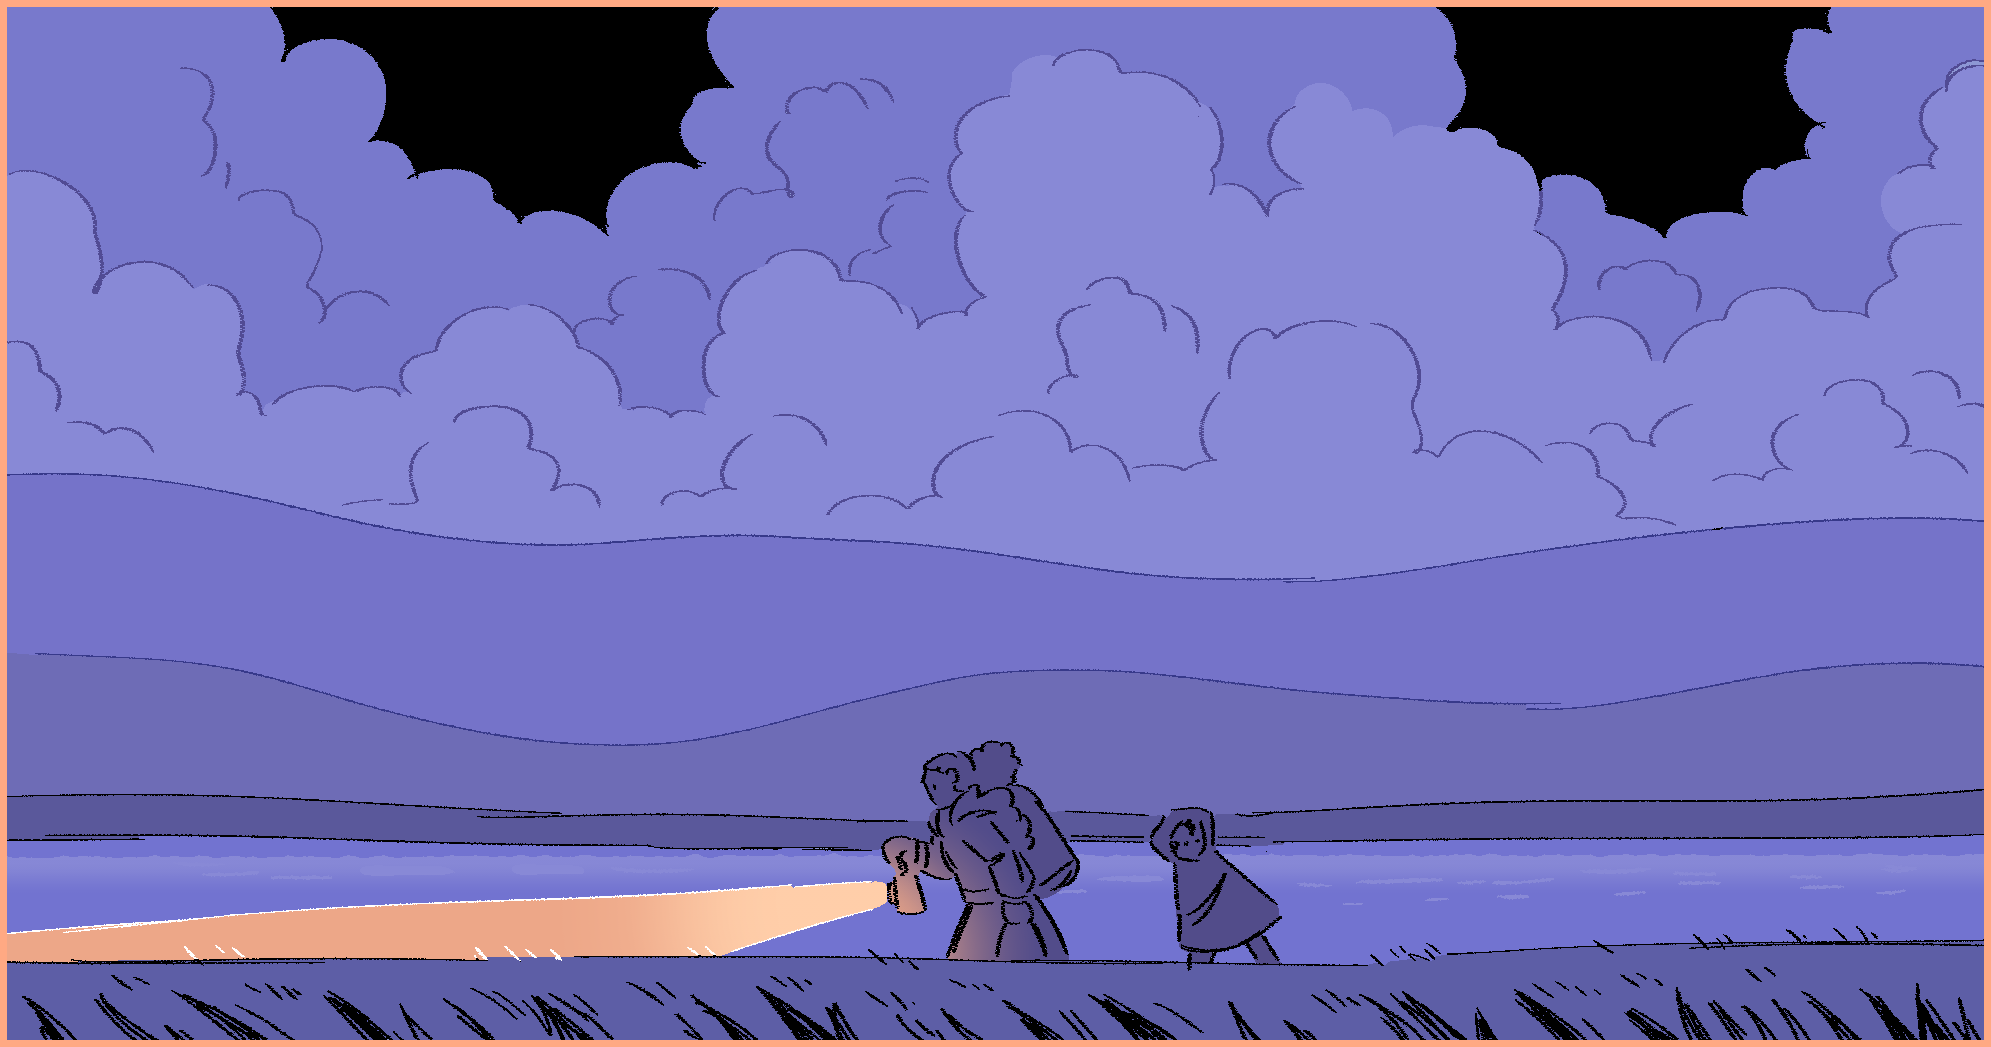 A drawing of Sol and Nyx walking through a dark field at night, behind them is the river, a wall of mist, and large cumulonimbus clouds. Sol is holding her hand lantern in front of her as she leads the way with its light, and Nyx is following behind her, though casting a glance back over her shoulder.